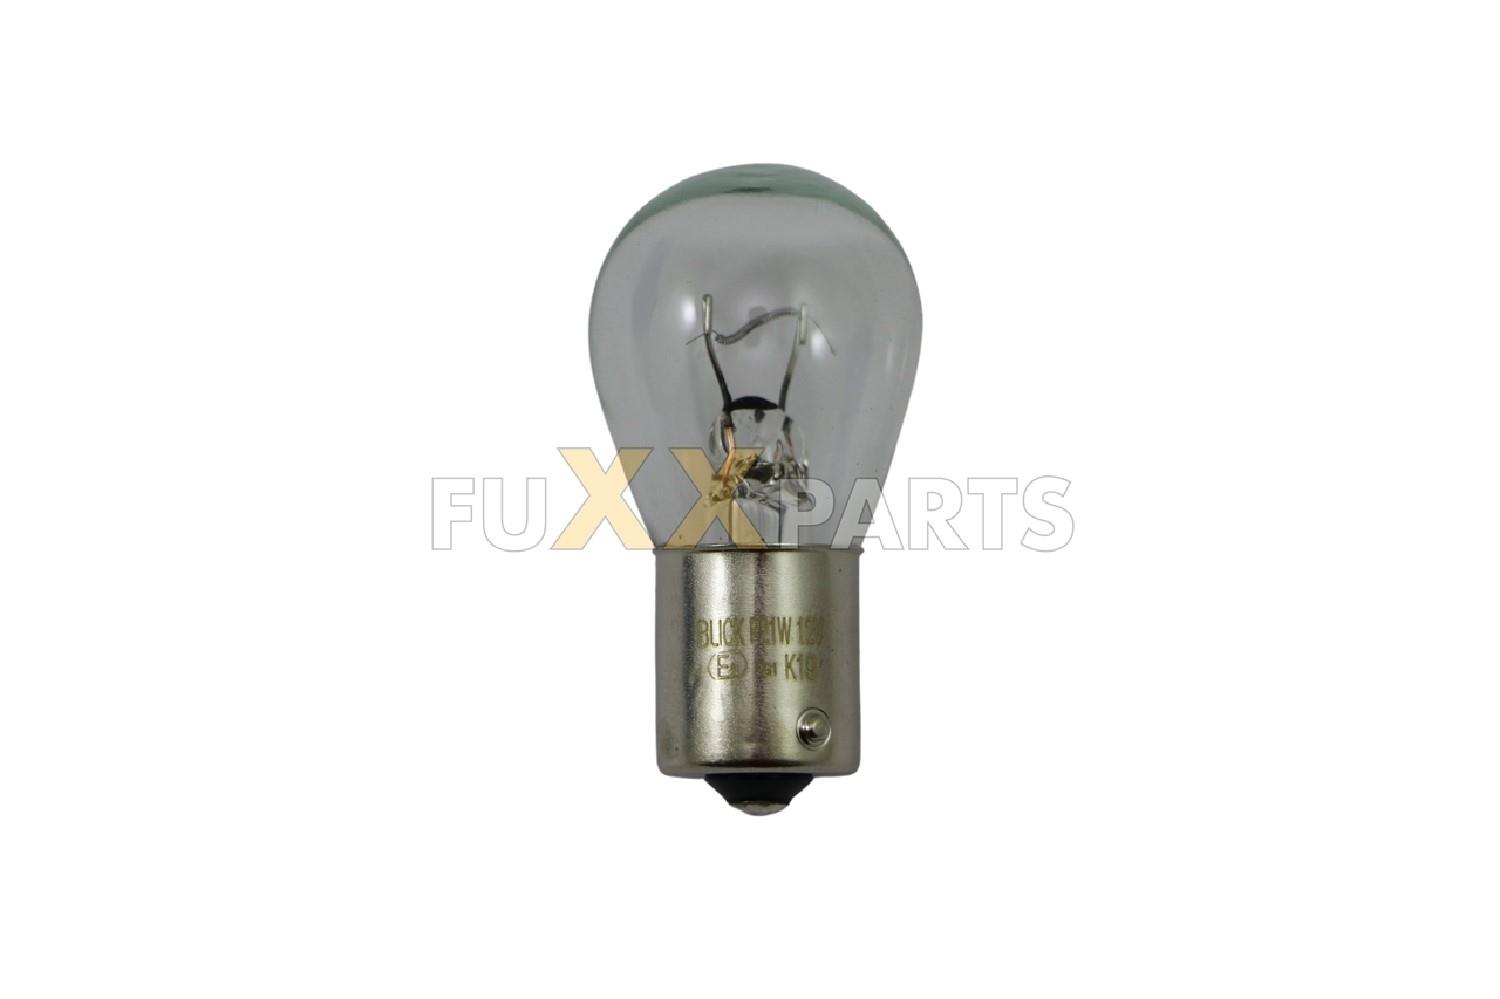 Glühlampe 12V - 21W, Fuxxparts